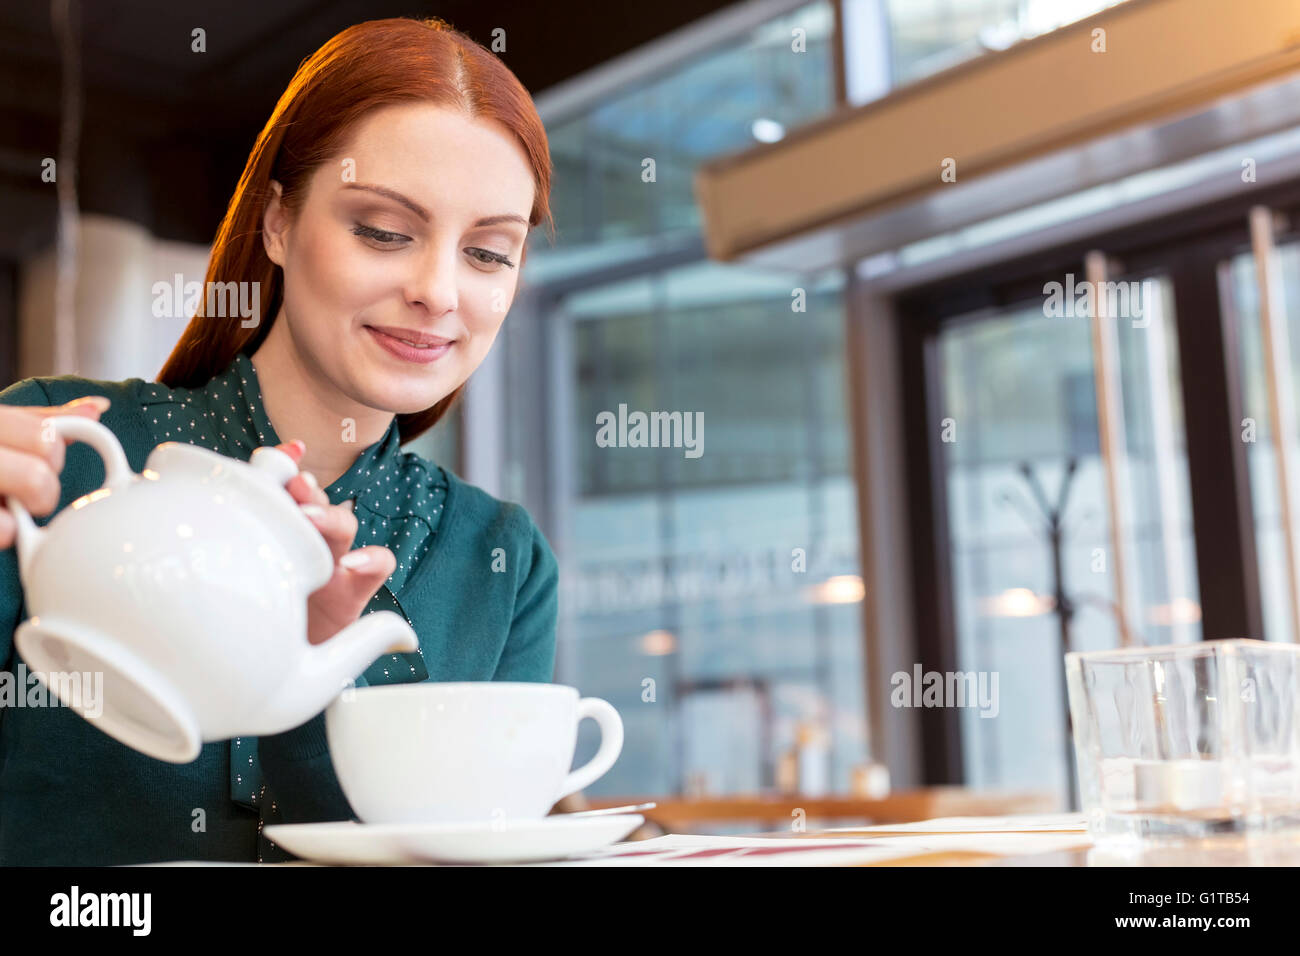 Smiling woman pouring tea in cafe Stock Photo